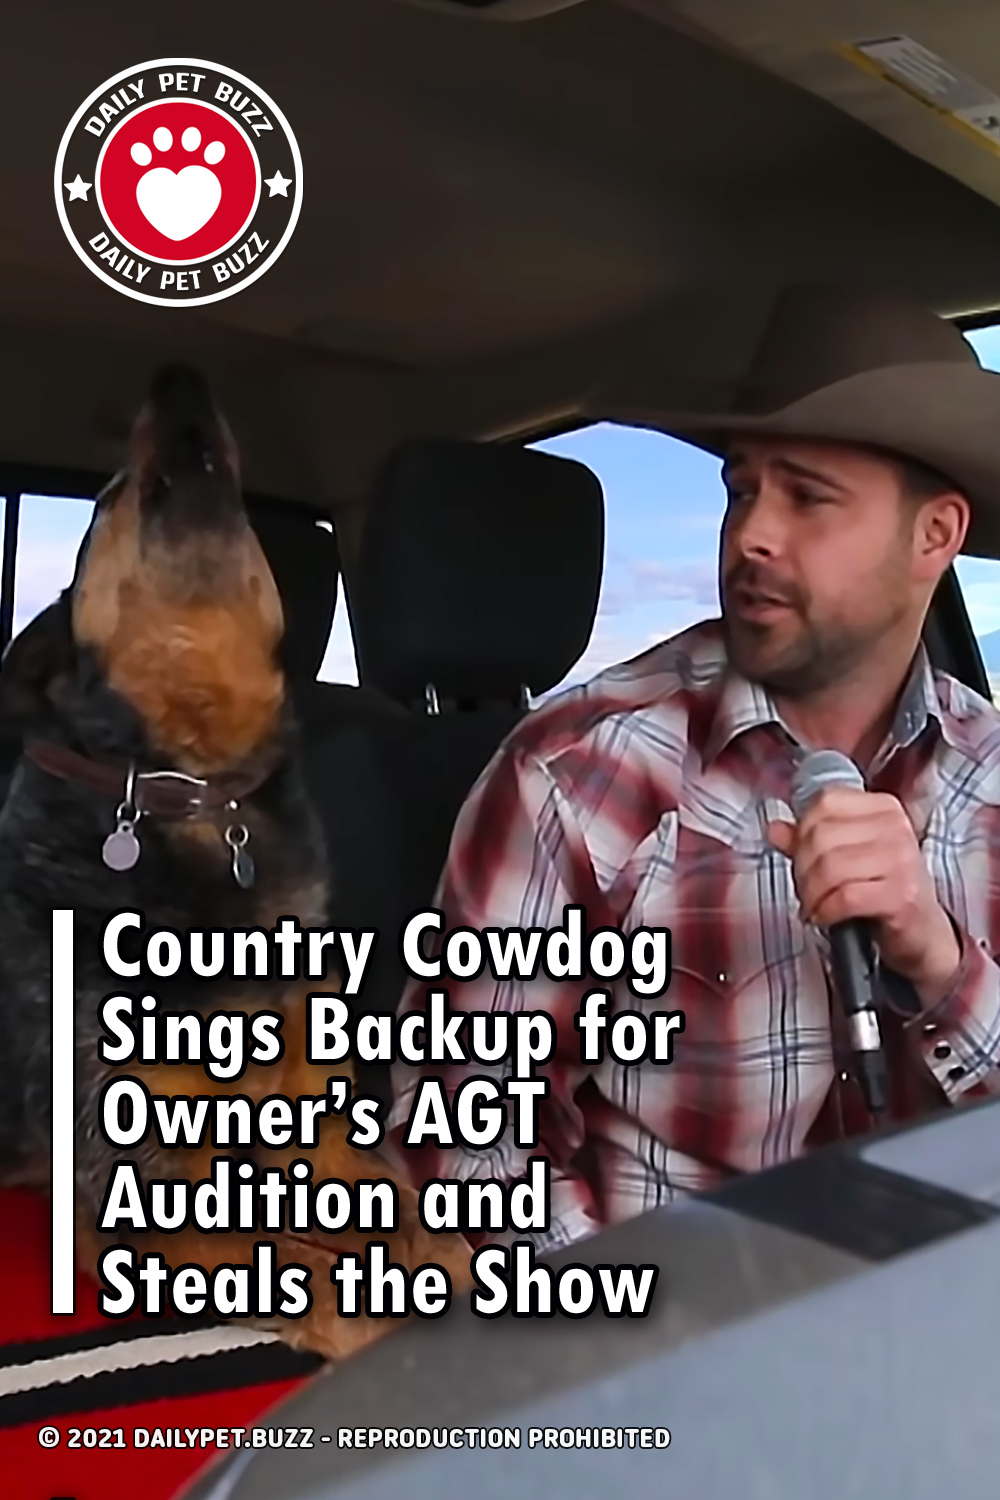 Country Cowdog Sings Backup for Owner’s AGT Audition and Steals the Show